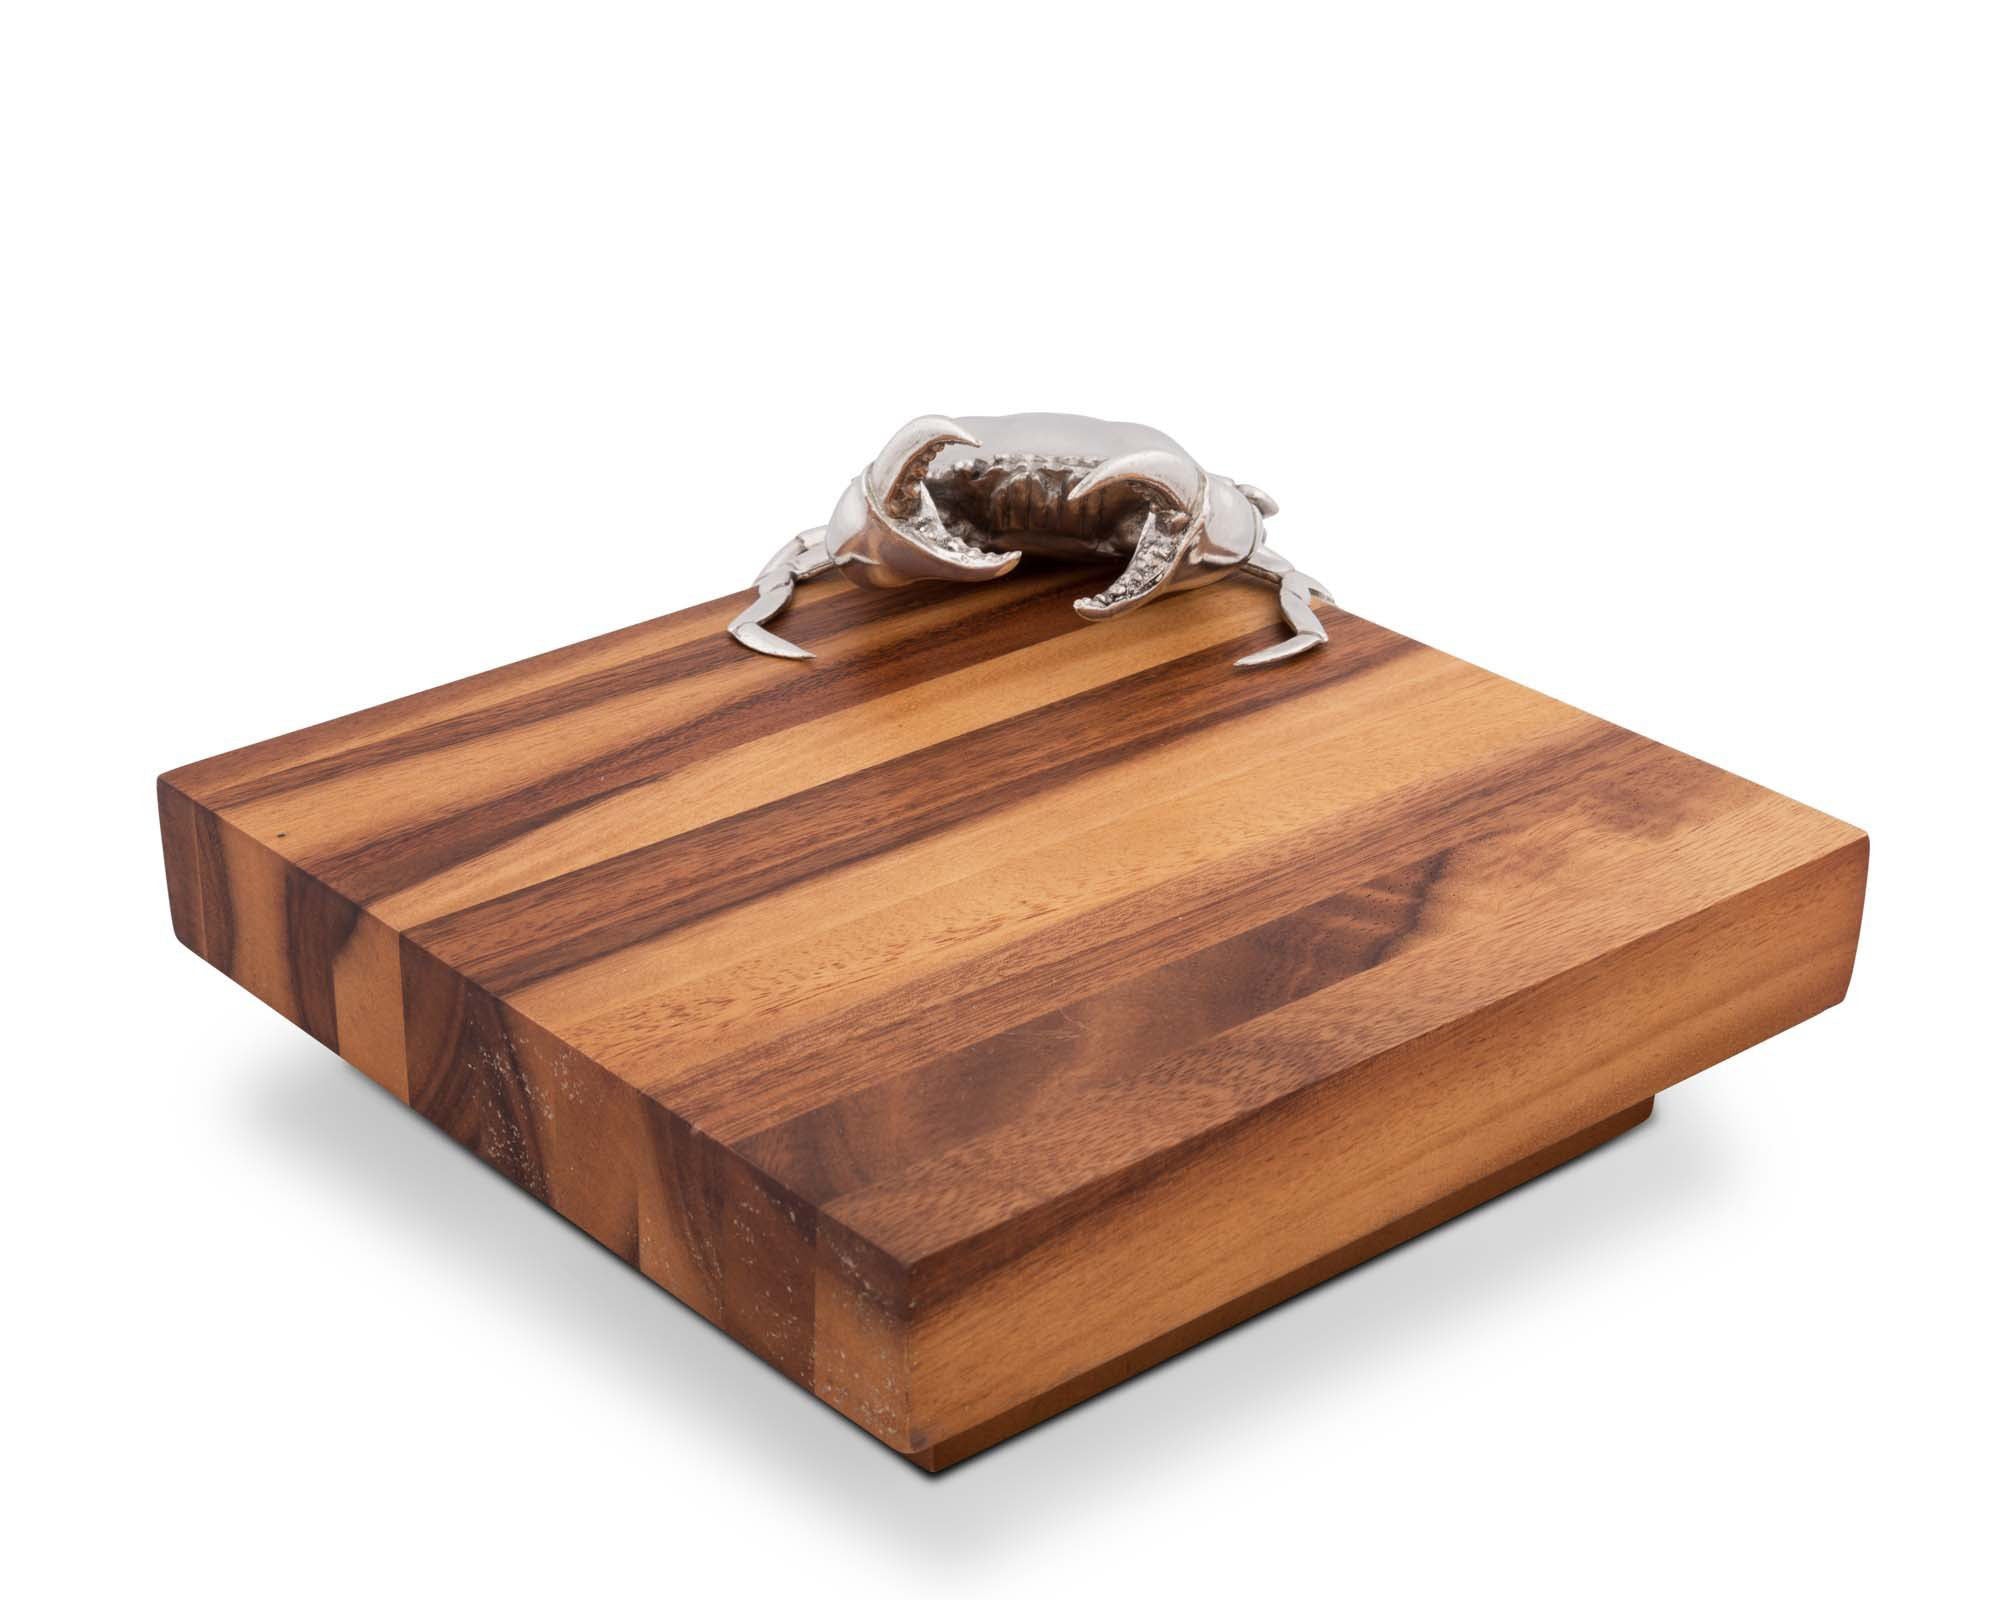 Vagabond House Crab Cheese Board Product Image